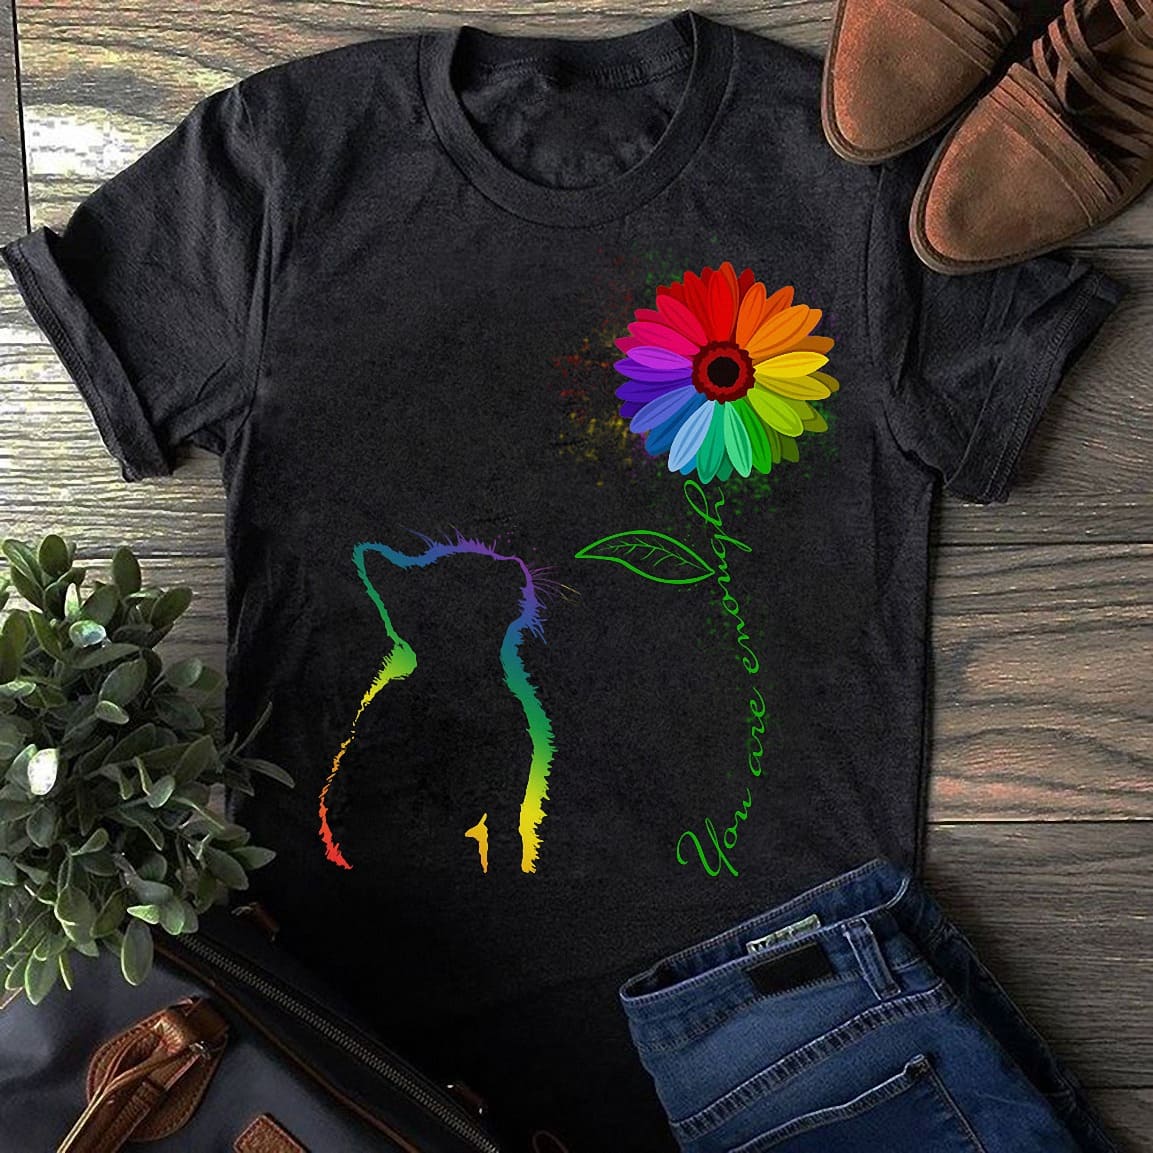 You are enough - Lgbt community, kitty cat graphic T-shirt